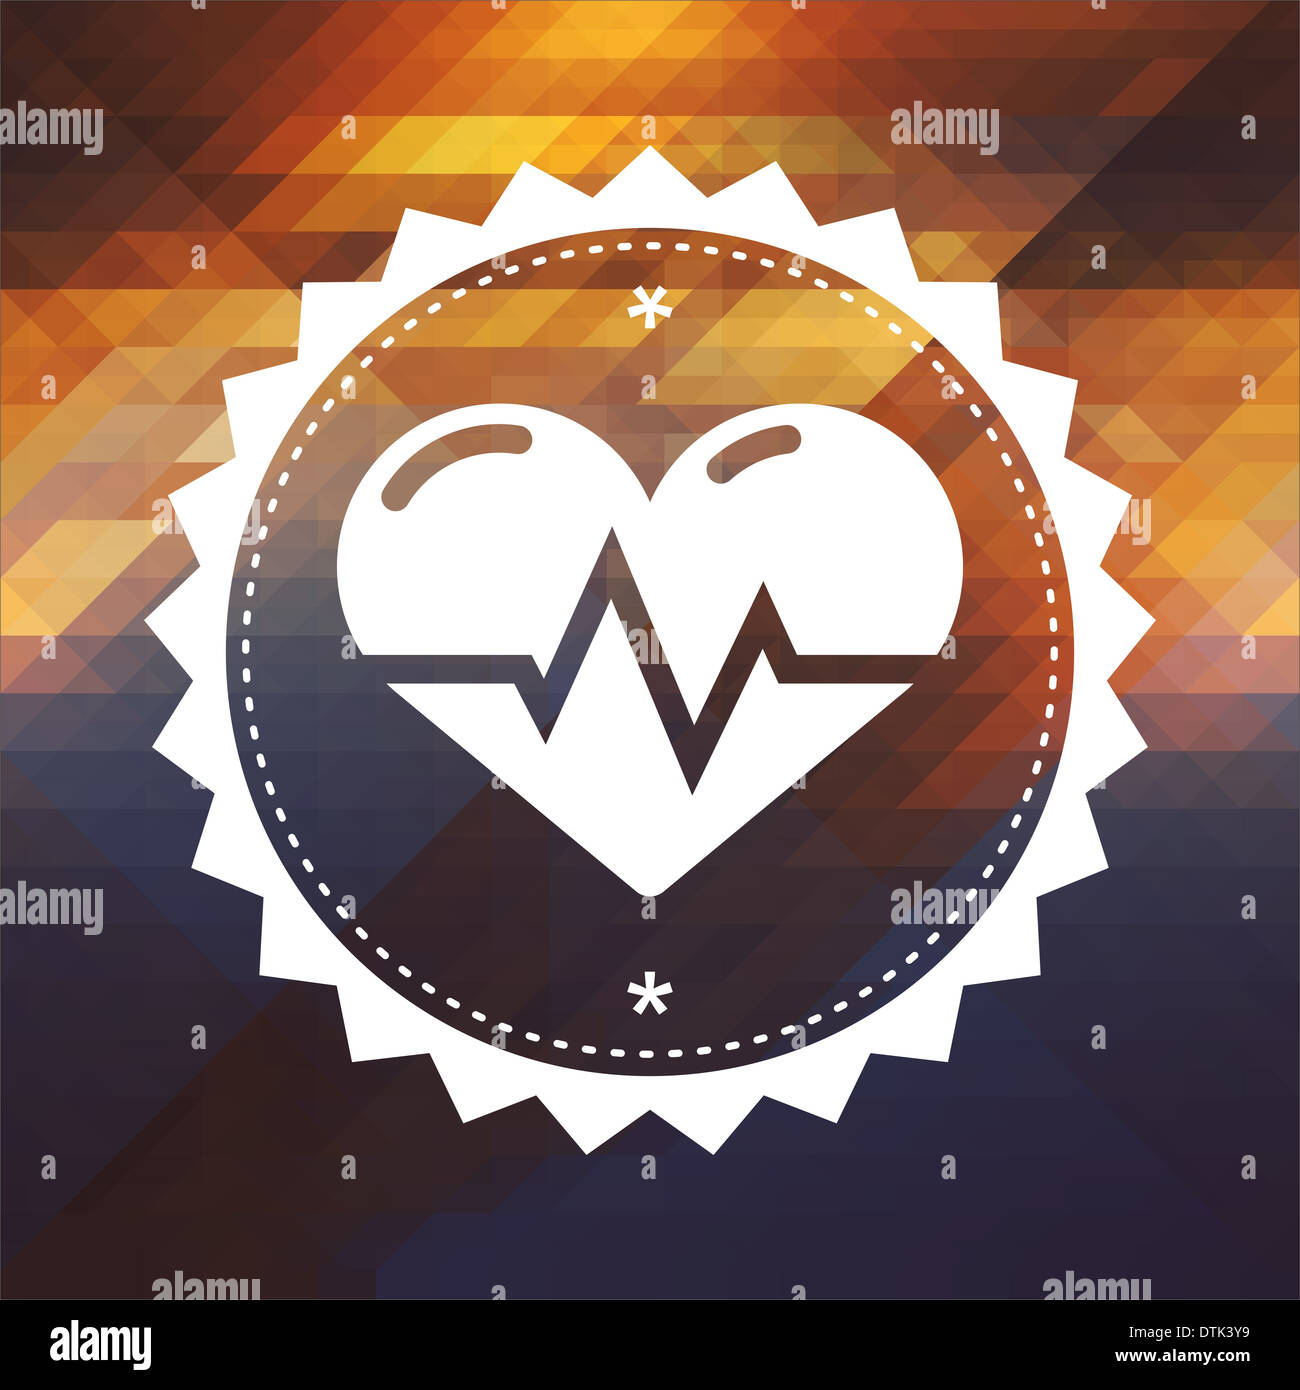 Heart with Cardiogram Line. Retro label design. Hipster background made of triangles, color flow effect. Stock Photo